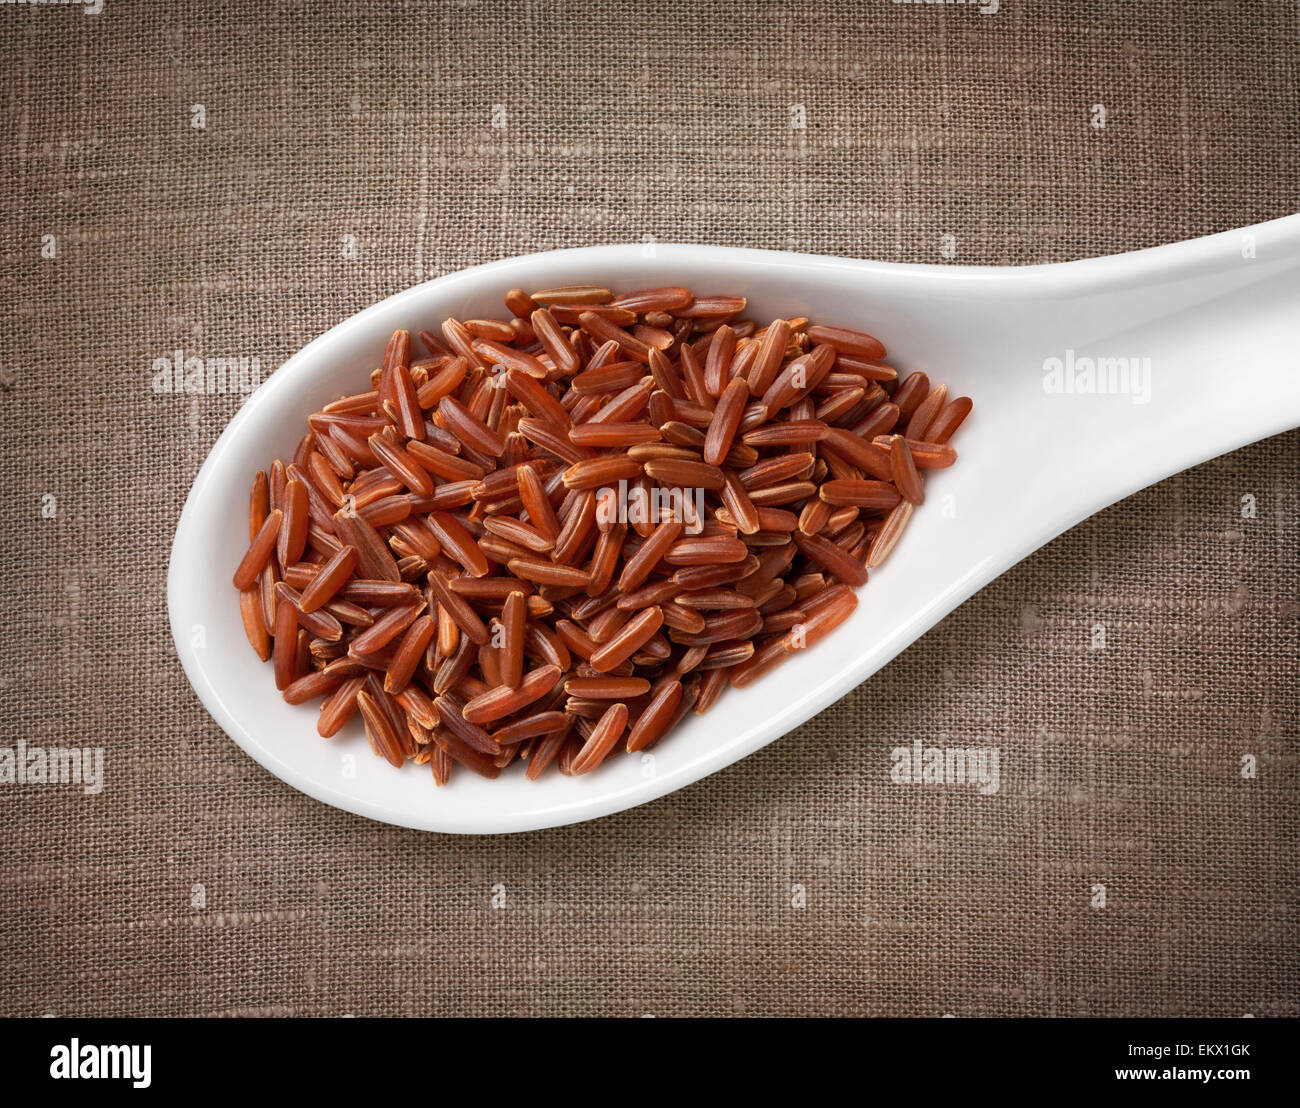 Red rice in white porcelain spoon / high-res photo of grain in white porcelain spoon on burlap sackcloth background Stock Photo